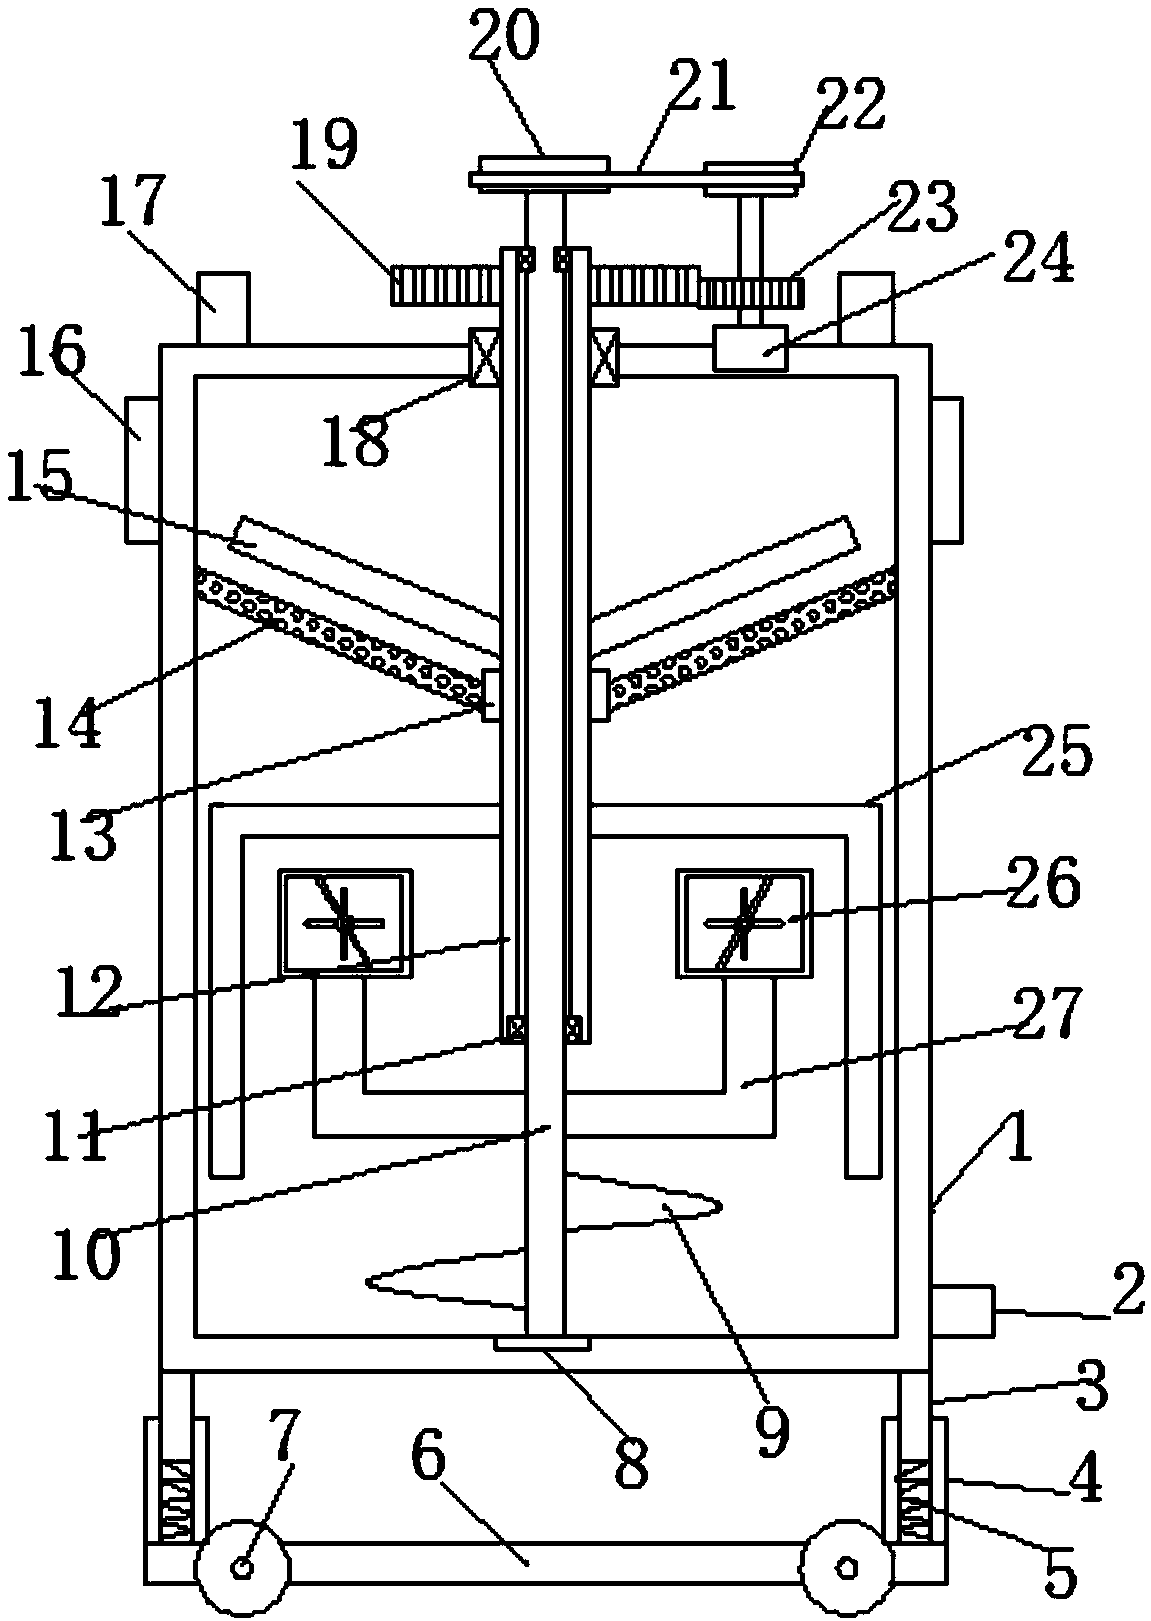 Bidirectional stirring chelating device for producing feed